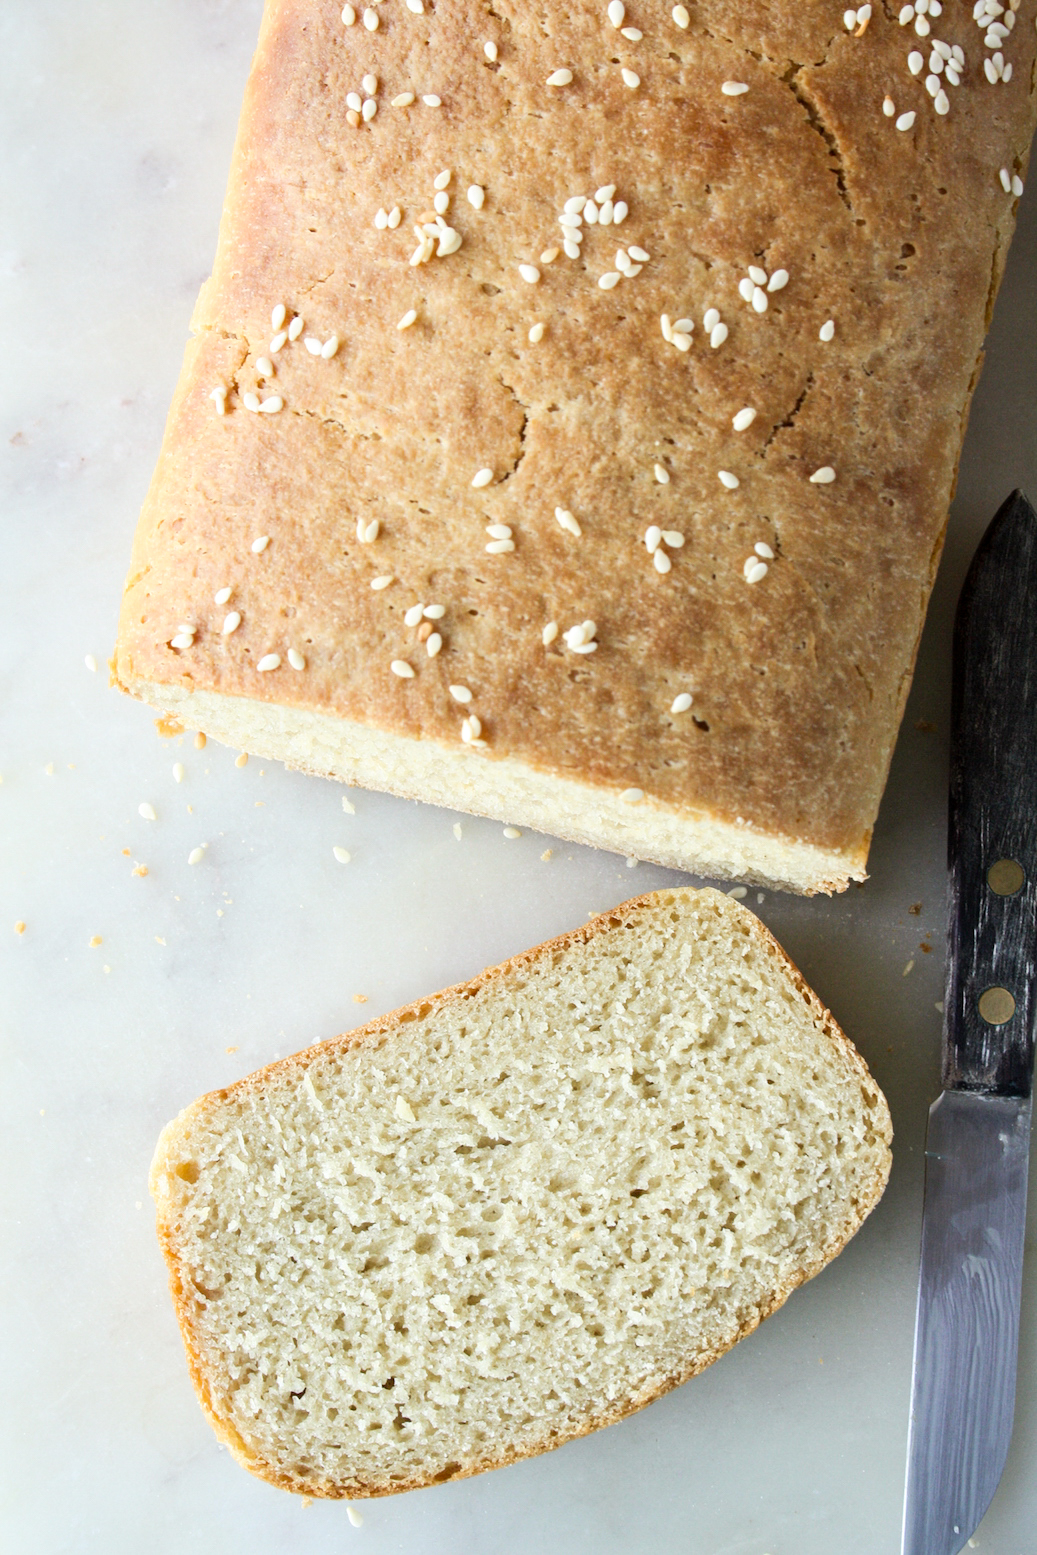 Homemade, tender, chewy half wholewheat bread!